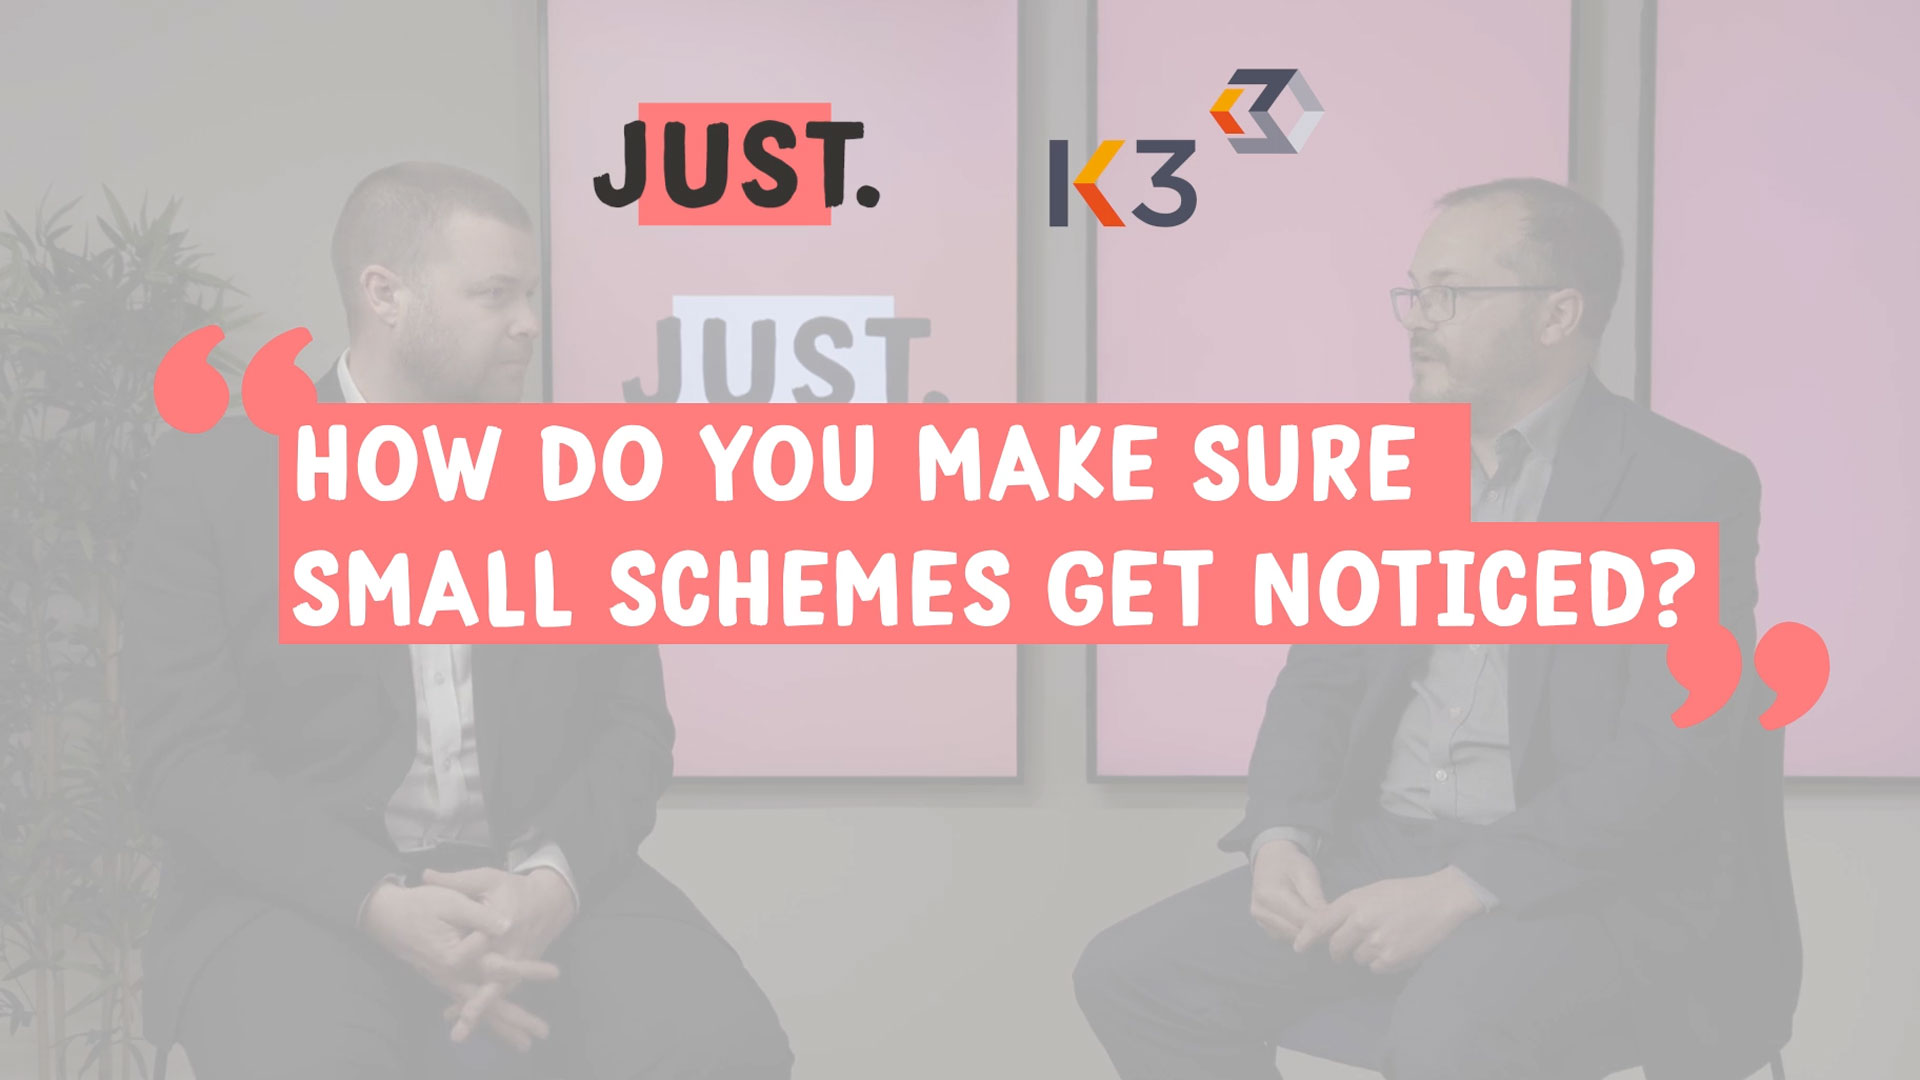 How do you make sure small schemes get noticed?